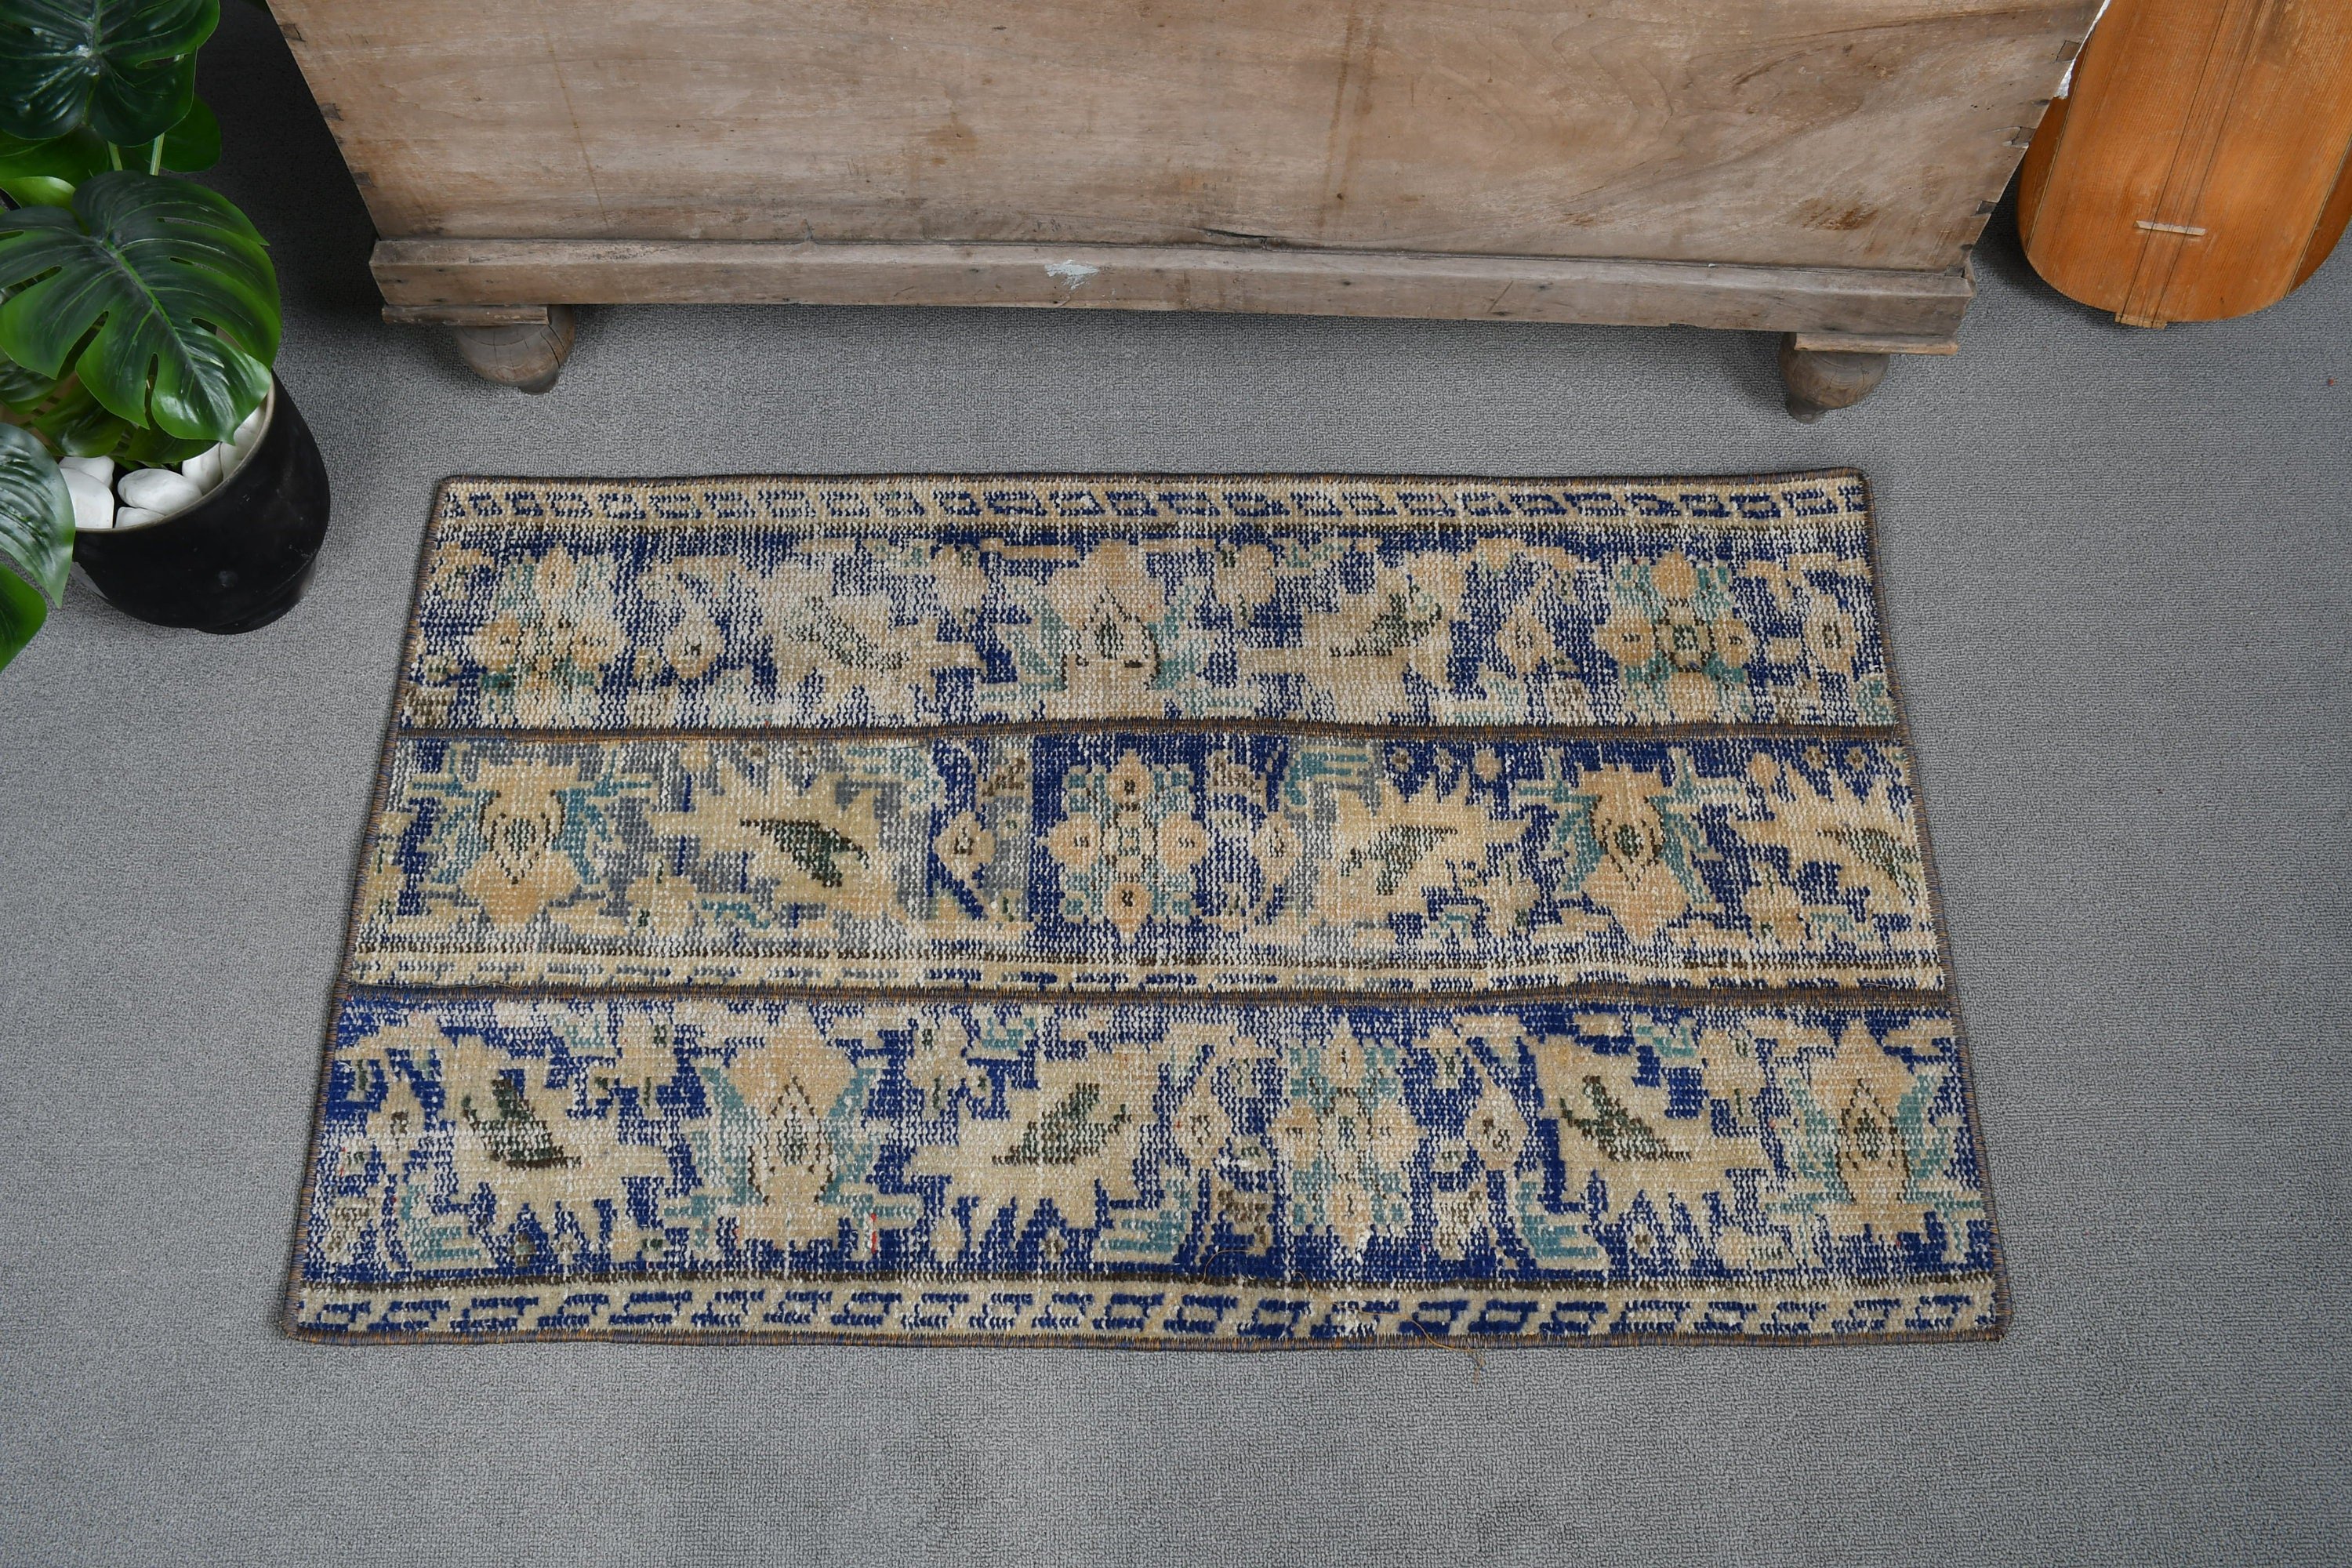 Antique Rugs, 2x3.3 ft Small Rug, Vintage Rug, Car Mat Rugs, Turkish Rugs, Blue Bedroom Rug, Kitchen Rug, Floor Rugs, Rugs for Kitchen